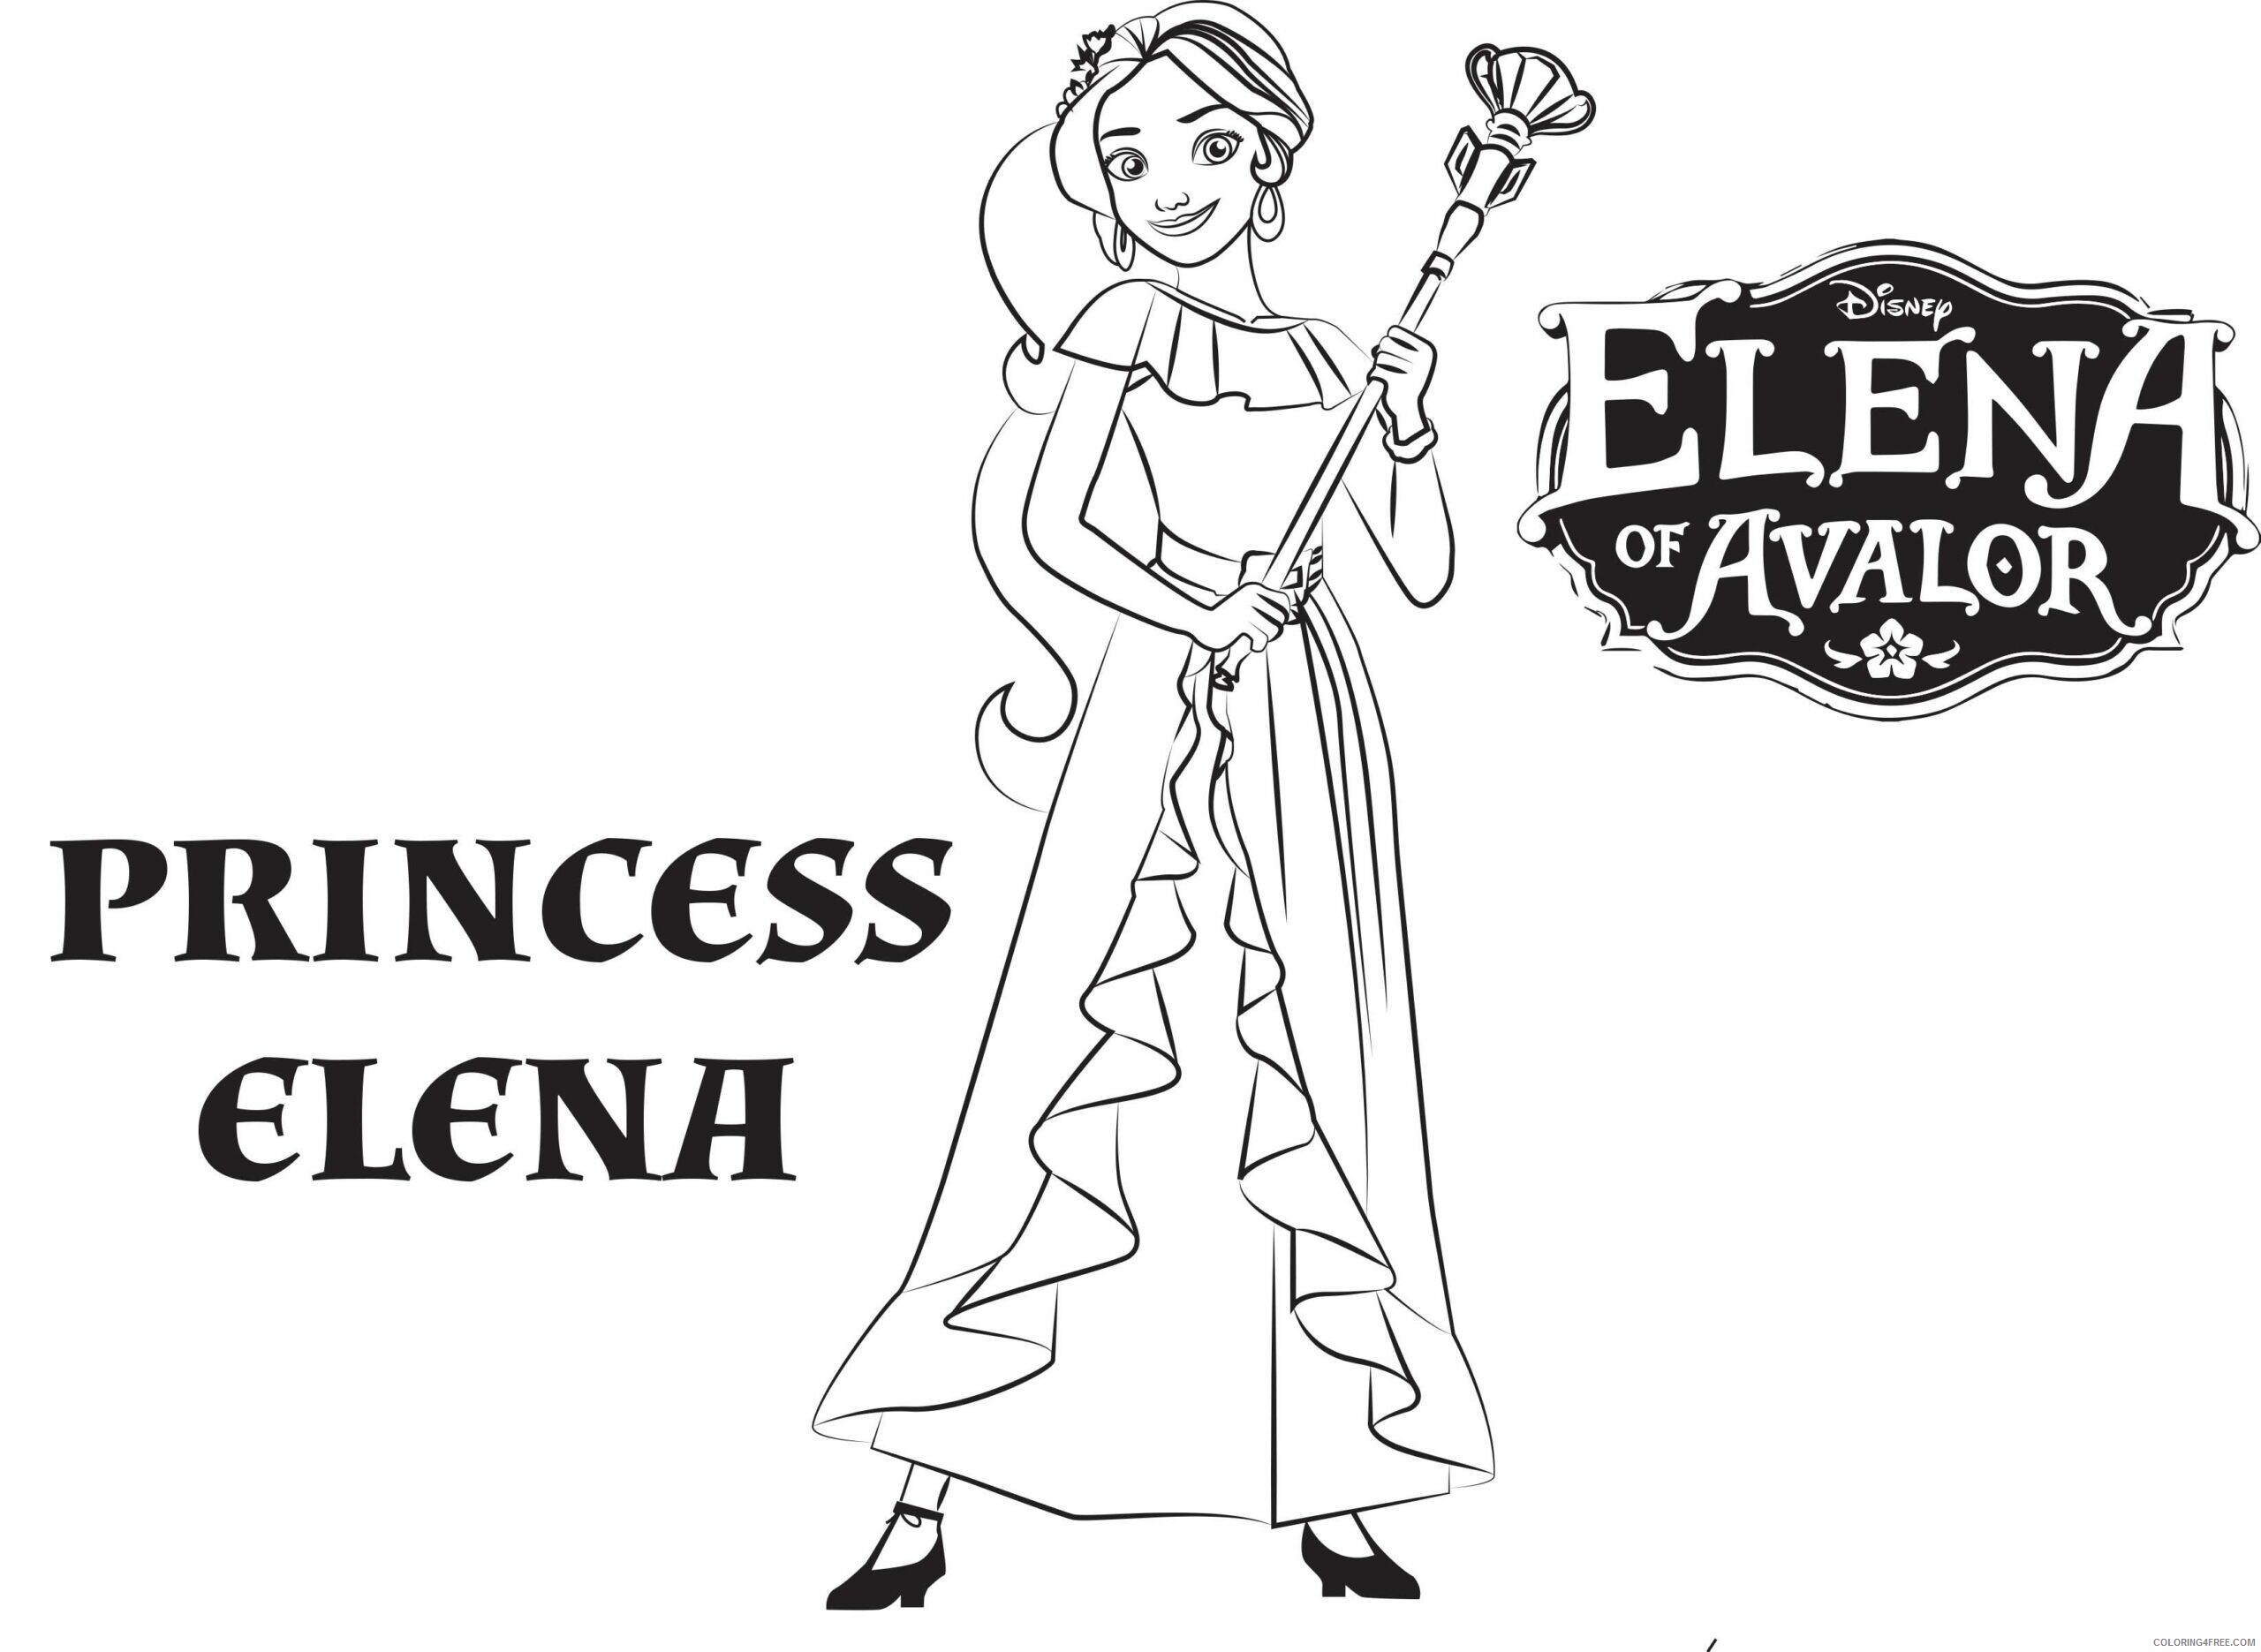 Elena of Avalor Coloring Pages TV Film Princess Elena of Avalor 2020 02642 Coloring4free